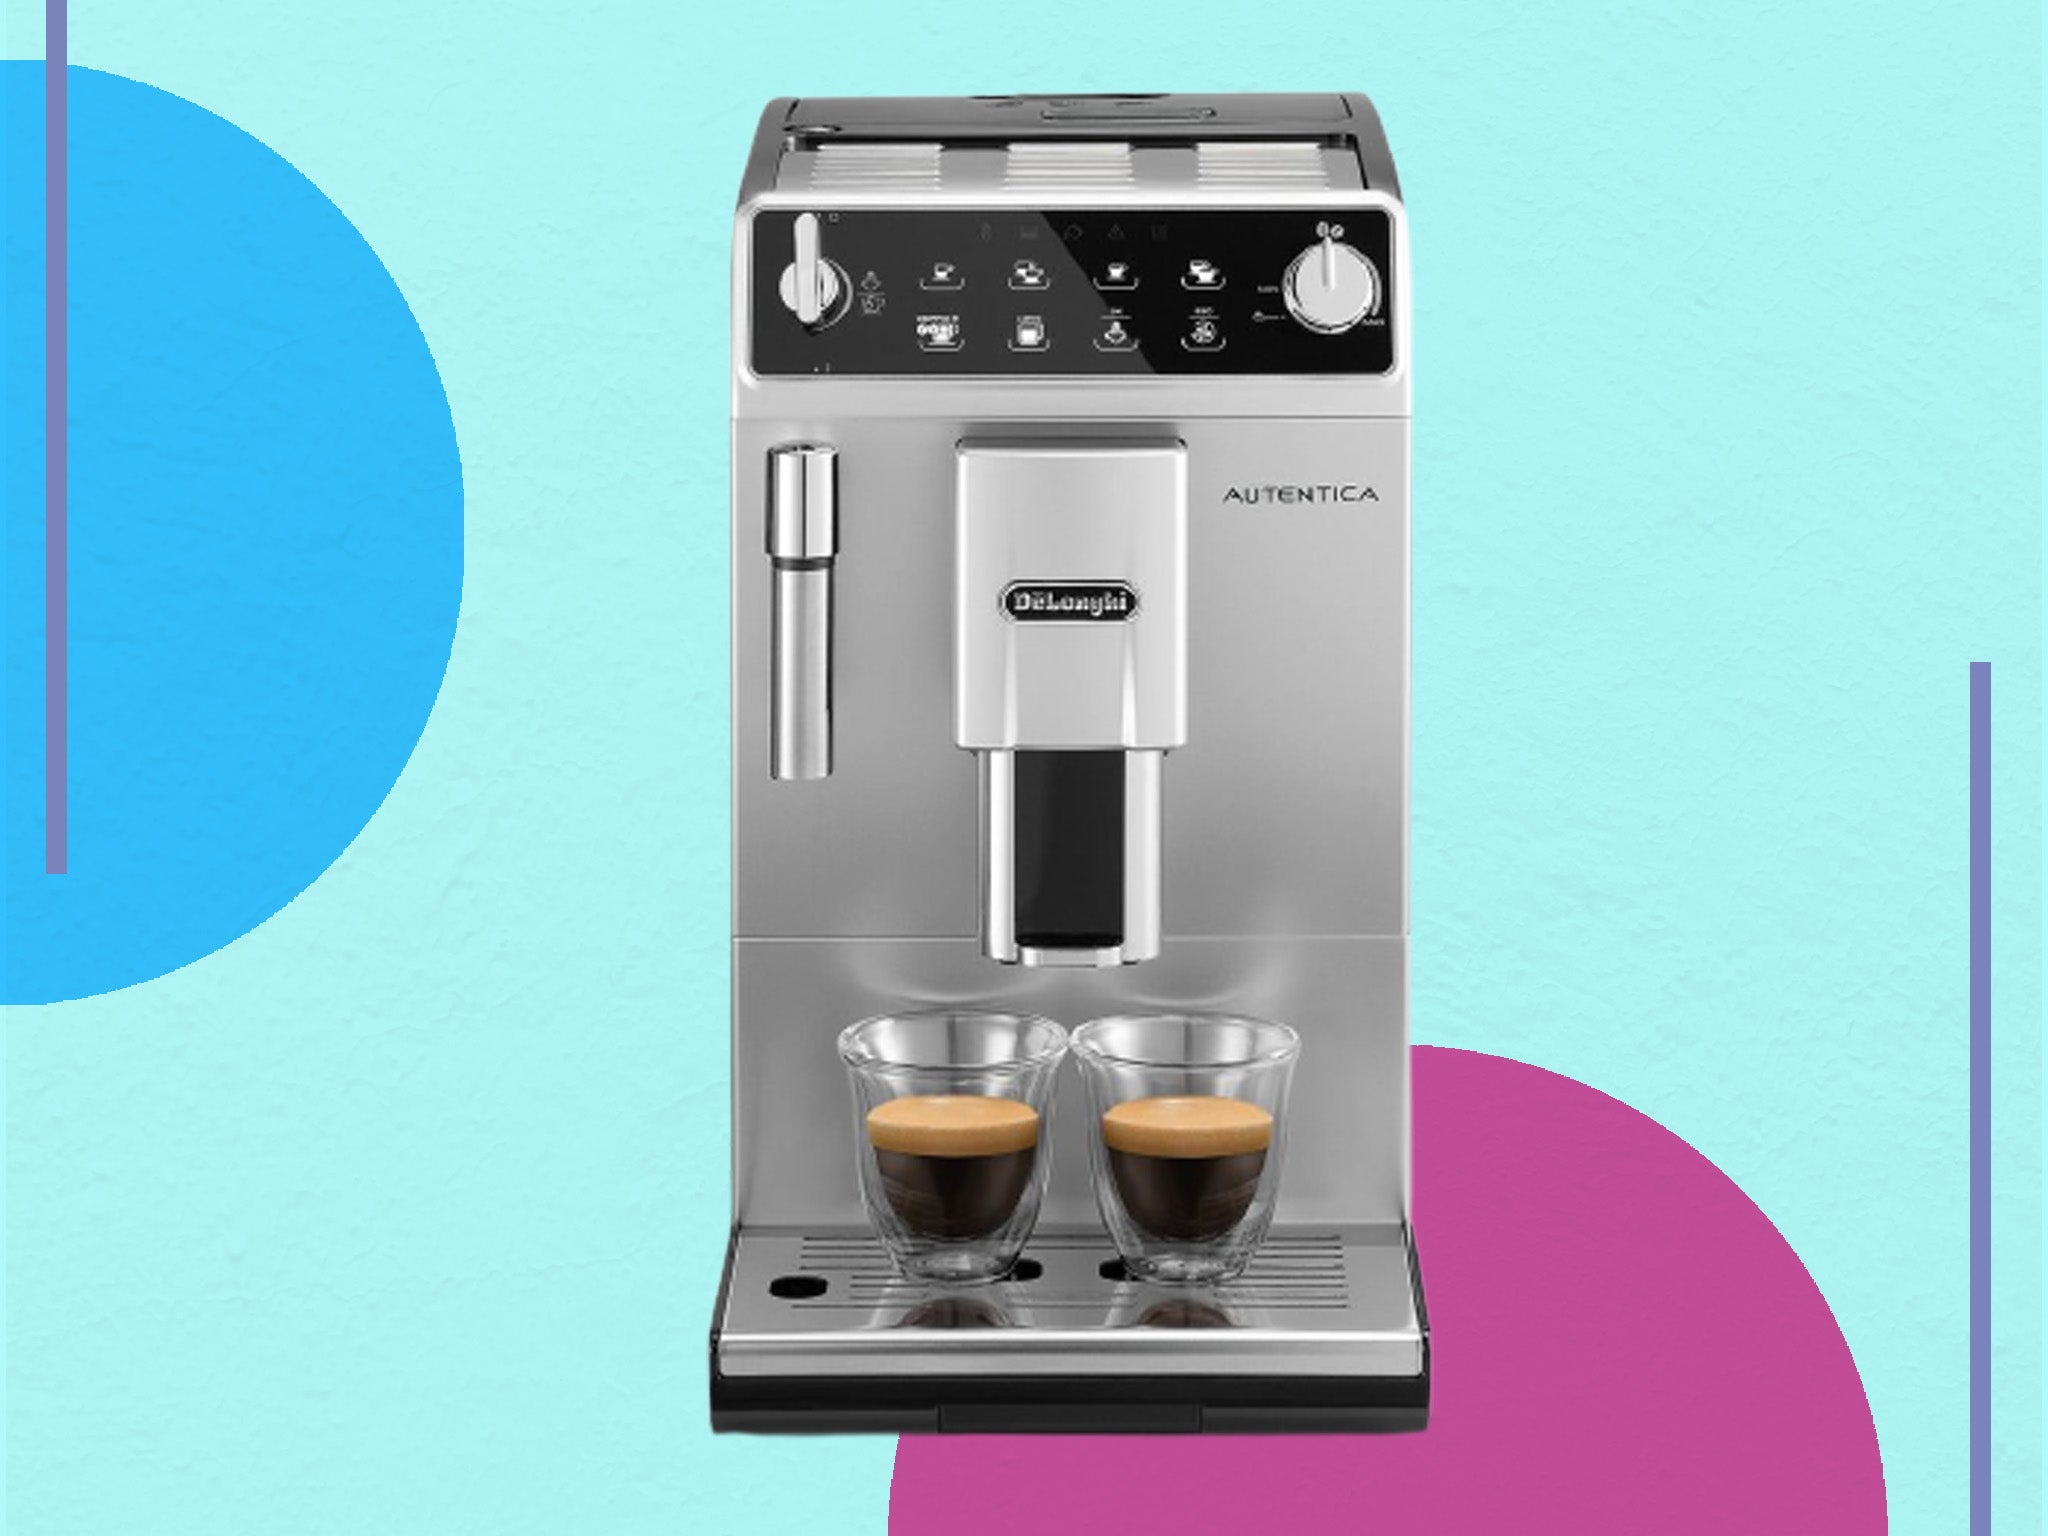 Make café-style coffee without setting foot outside your front door